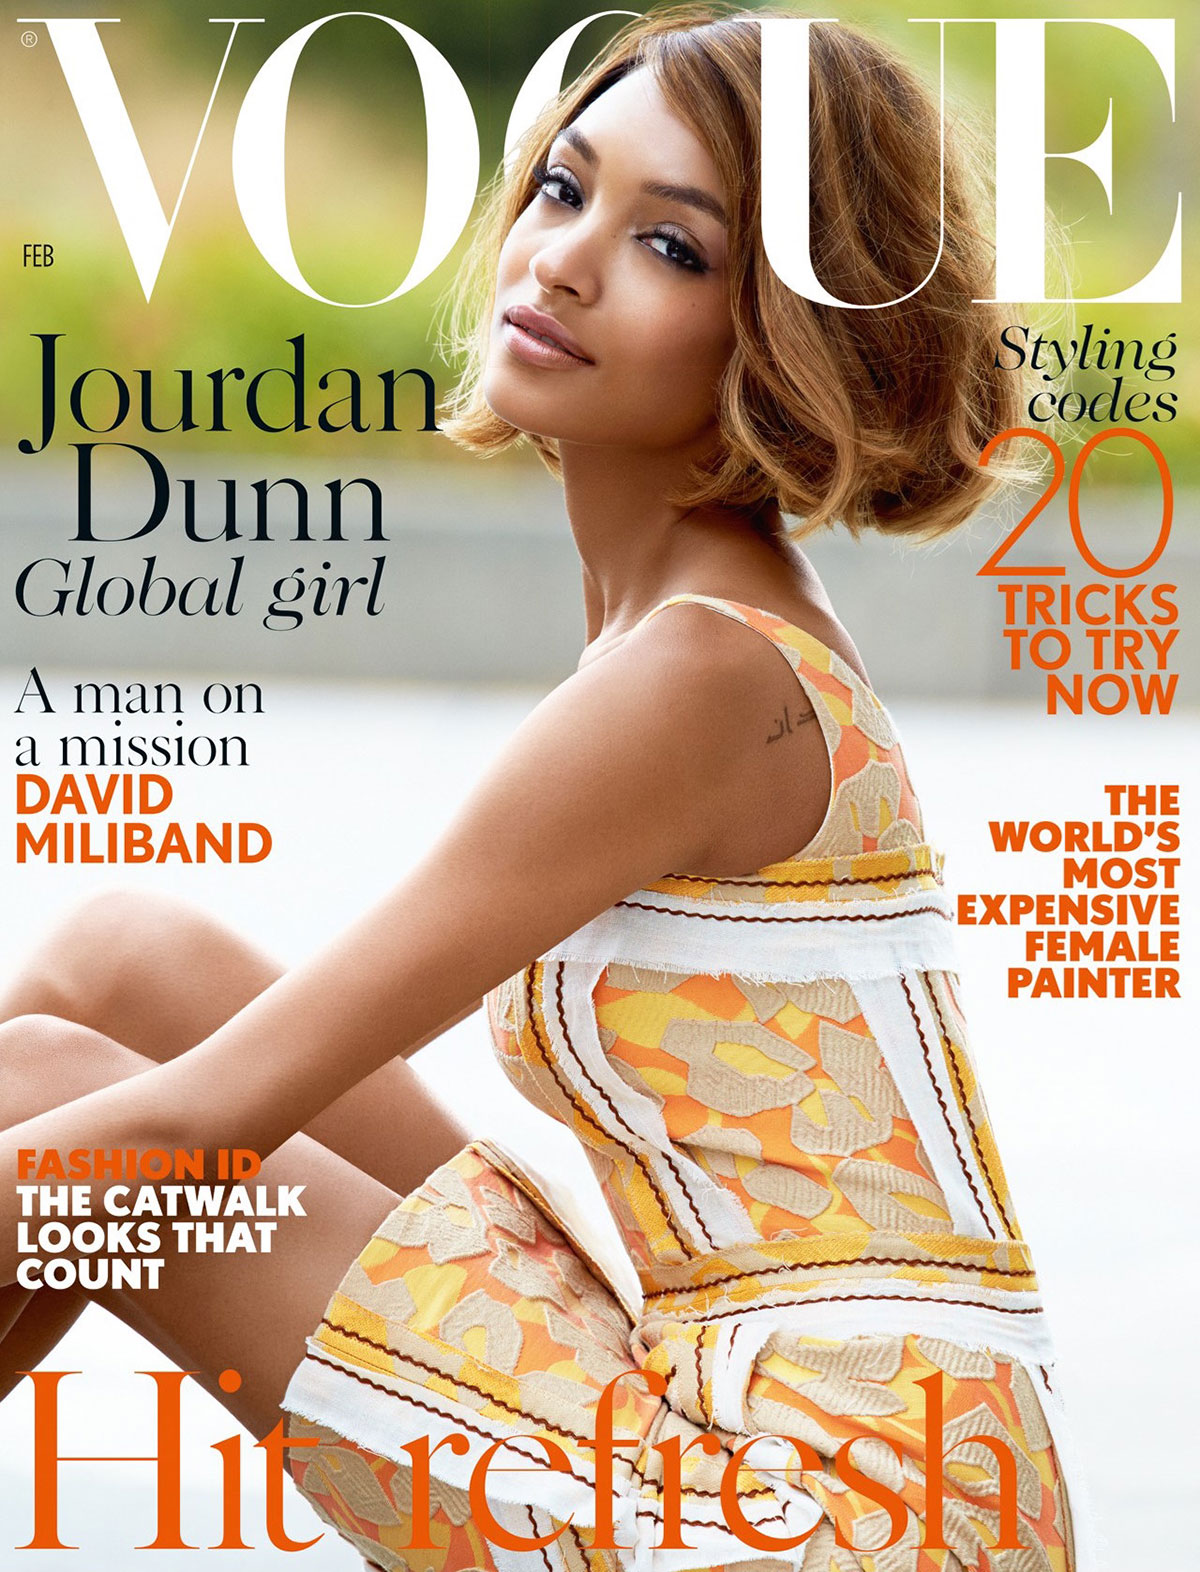 JOURDAN-DUNN-on-the-Cover-of-Vogue-Magazine-February-2015-Issue-1